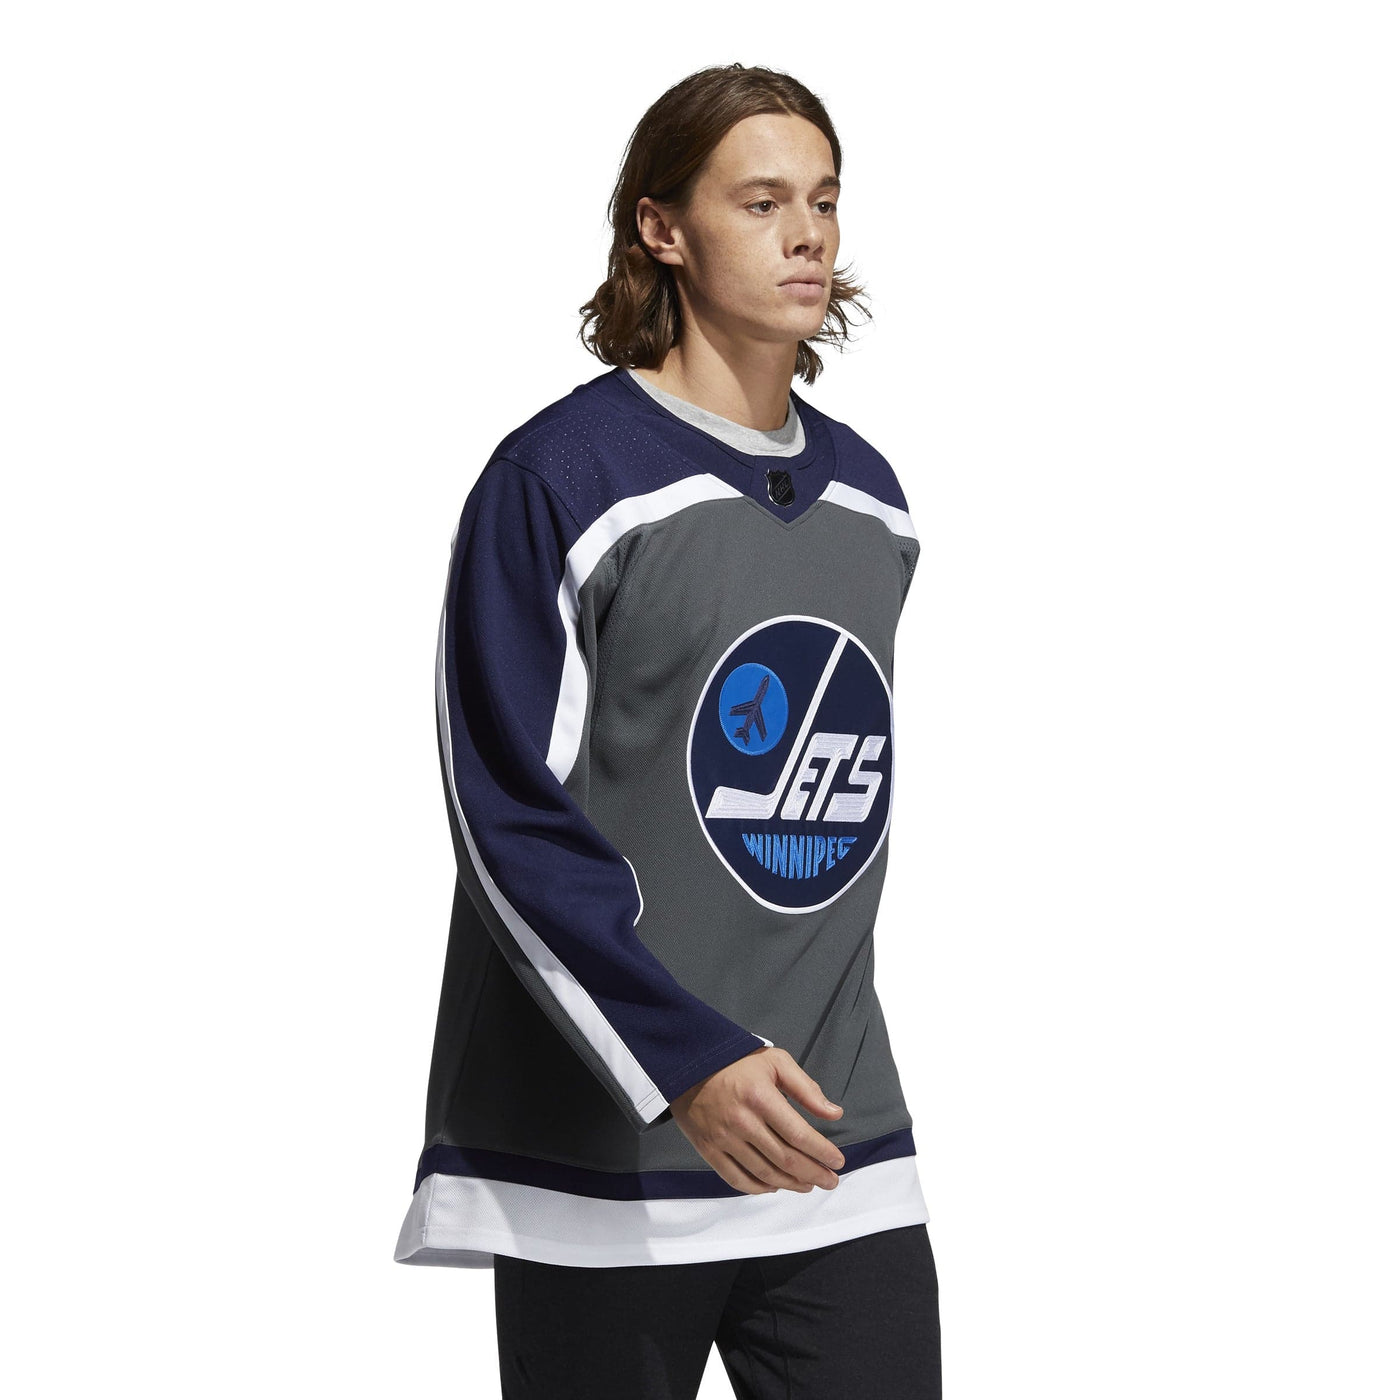 Winnipeg Jets: A Quick Look at the New Reverse Retro Jersey